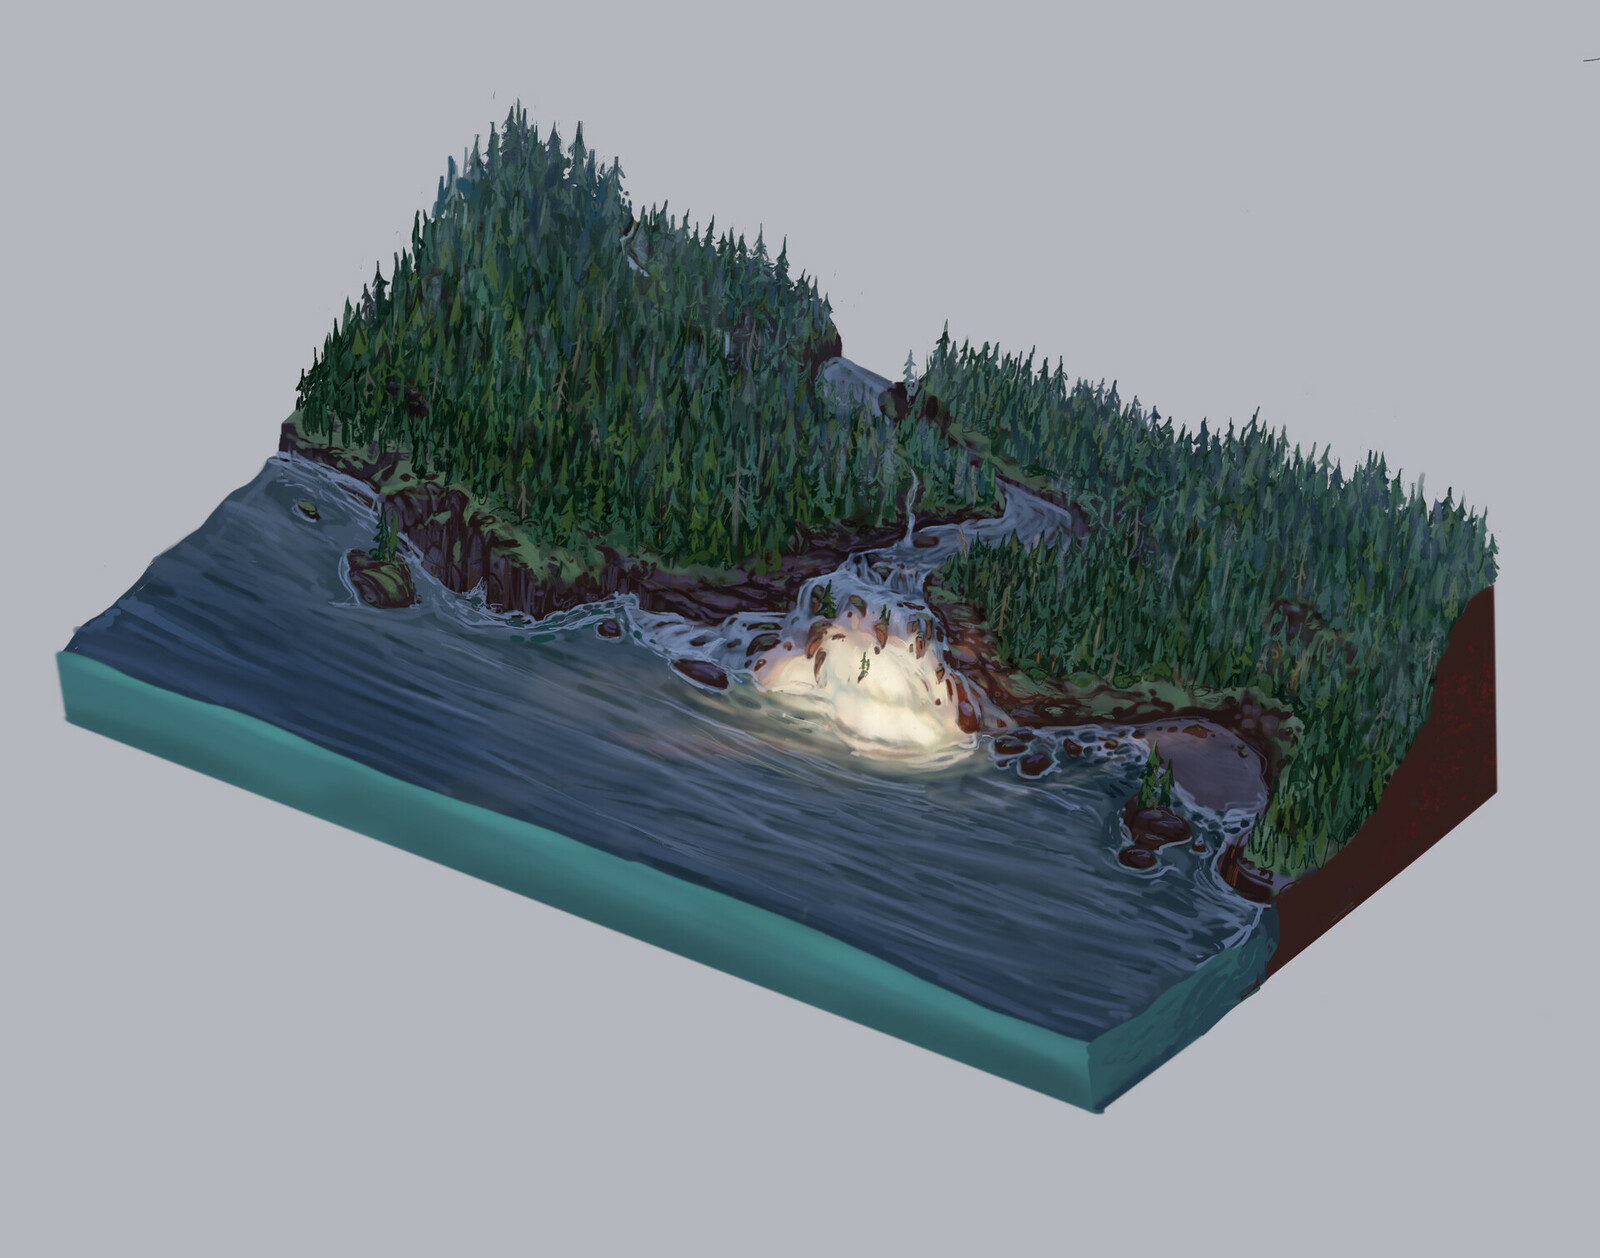 Top down view of the environment for the scene.